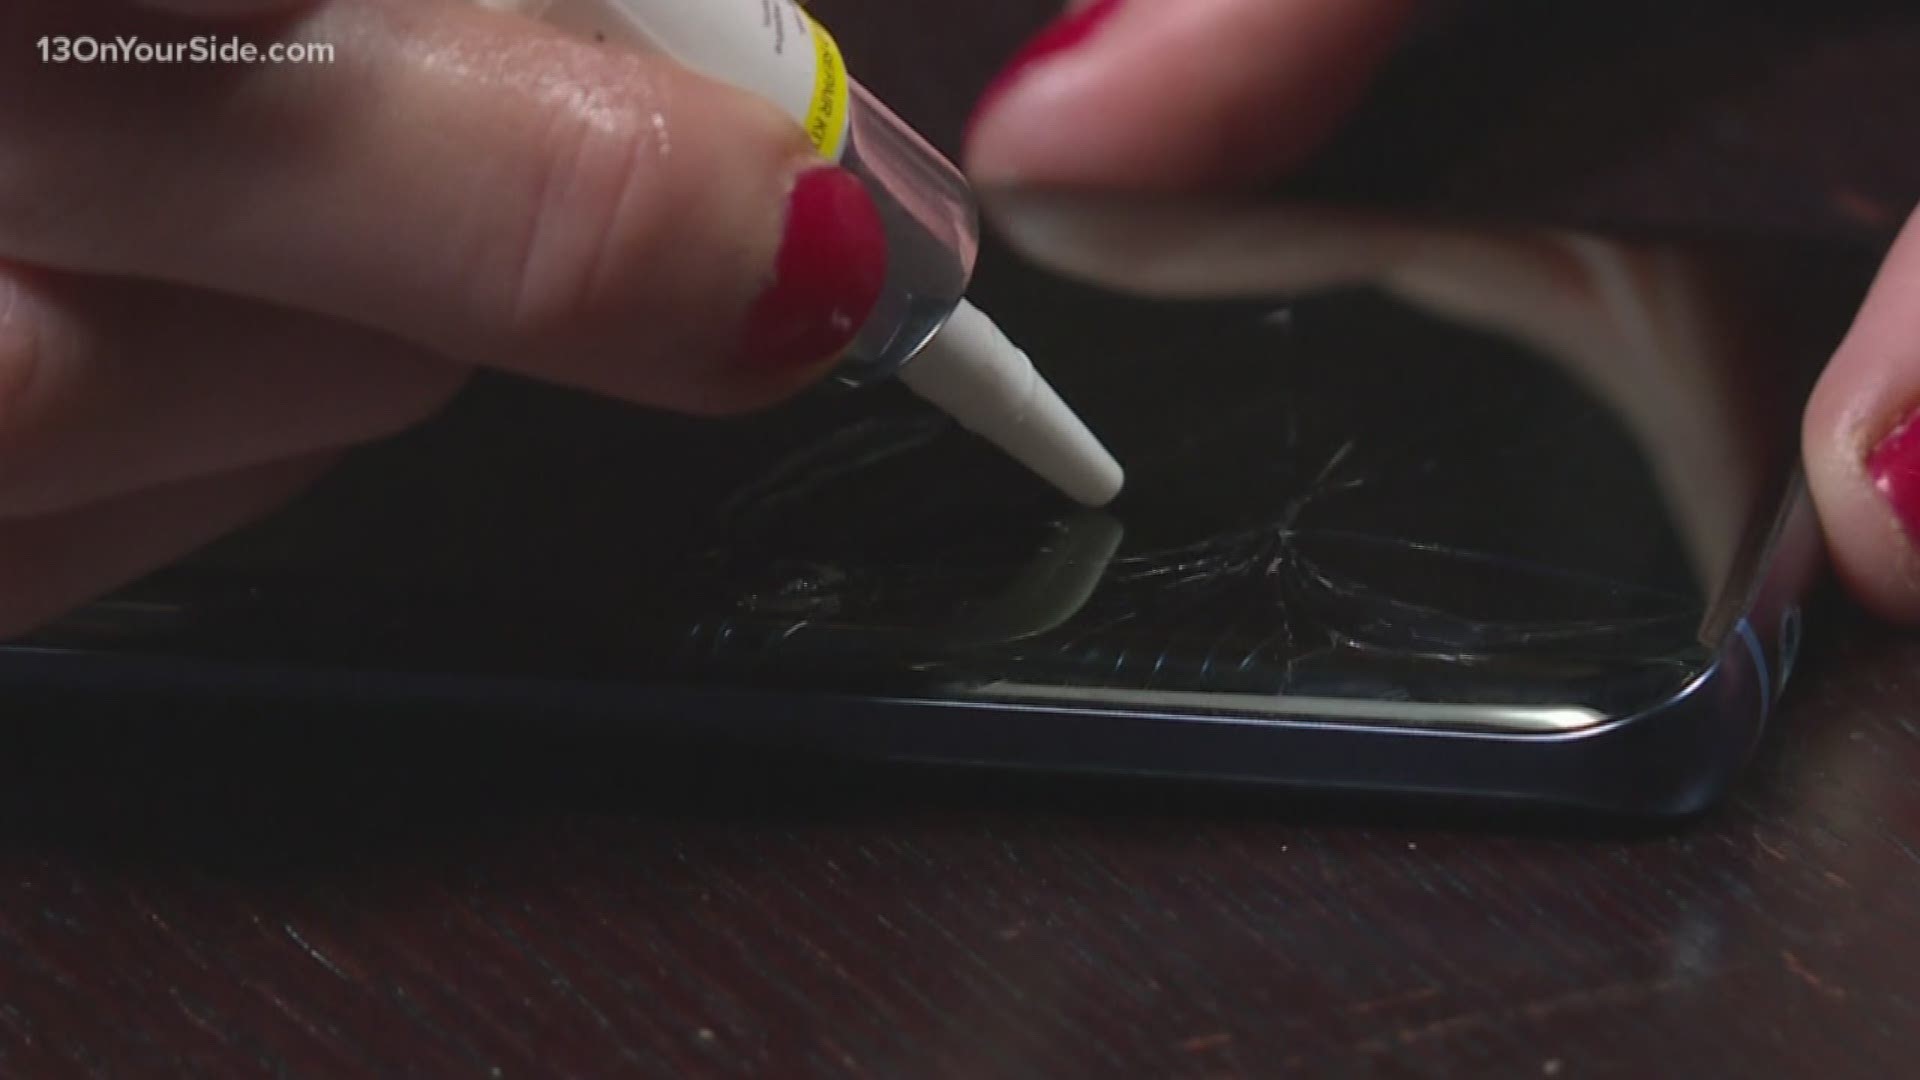 In this edition of "Try It Before You Buy It" Kristin Mazur puts a phone repair kit to the test, to see if it can stop a crack from spreading.